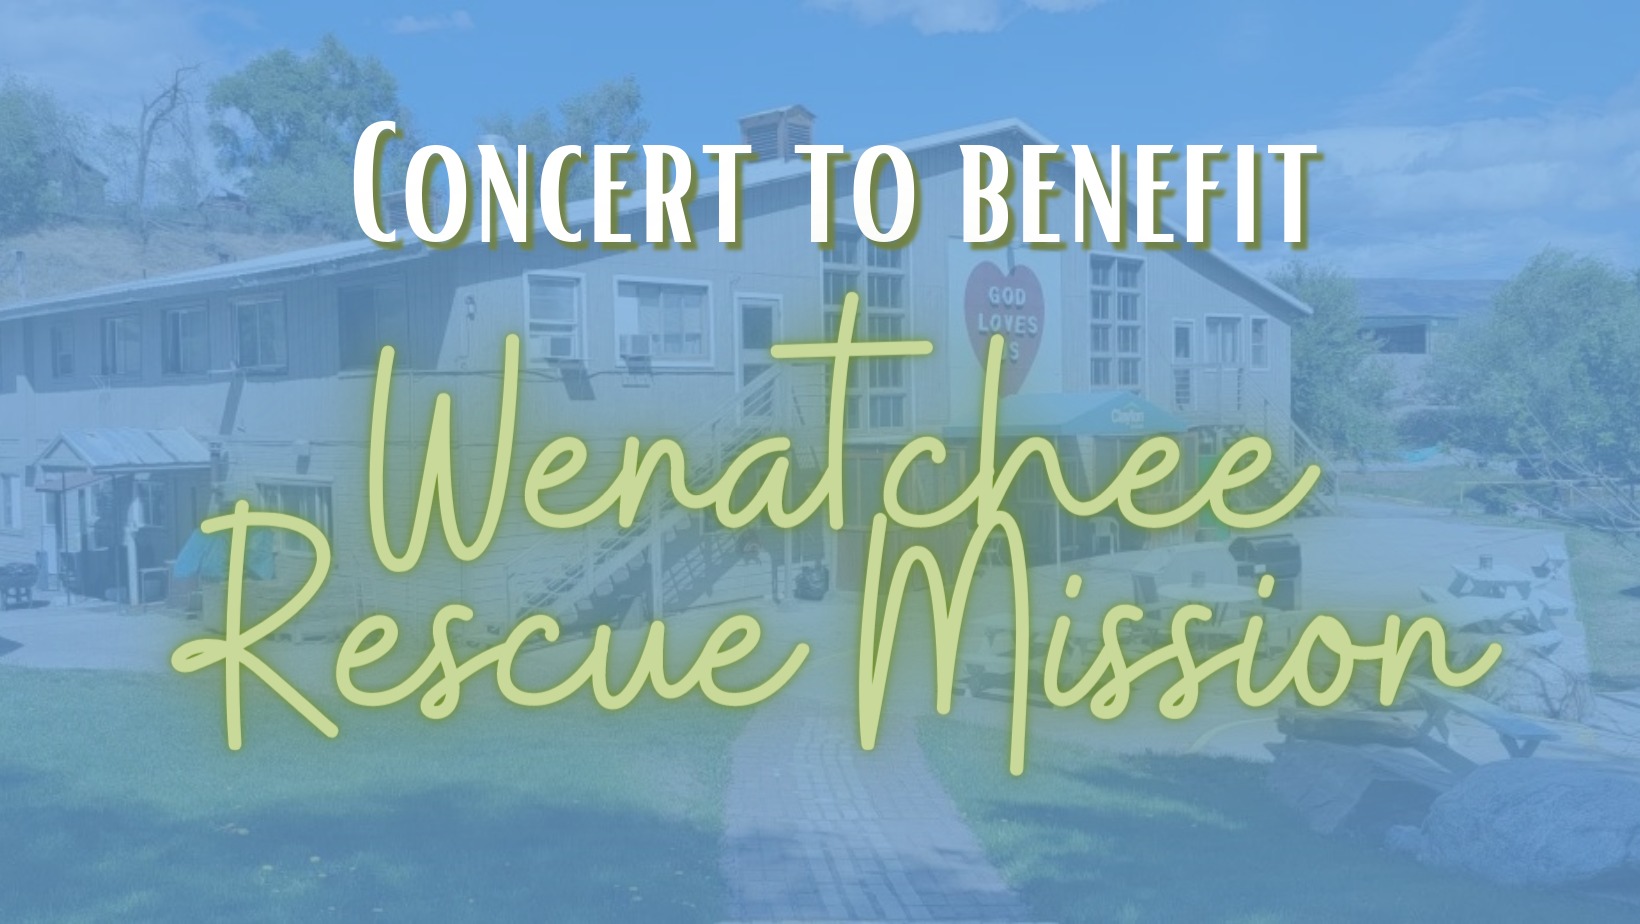 <h1 class="tribe-events-single-event-title">Concert to benefit Wenatchee Rescue Mission</h1>